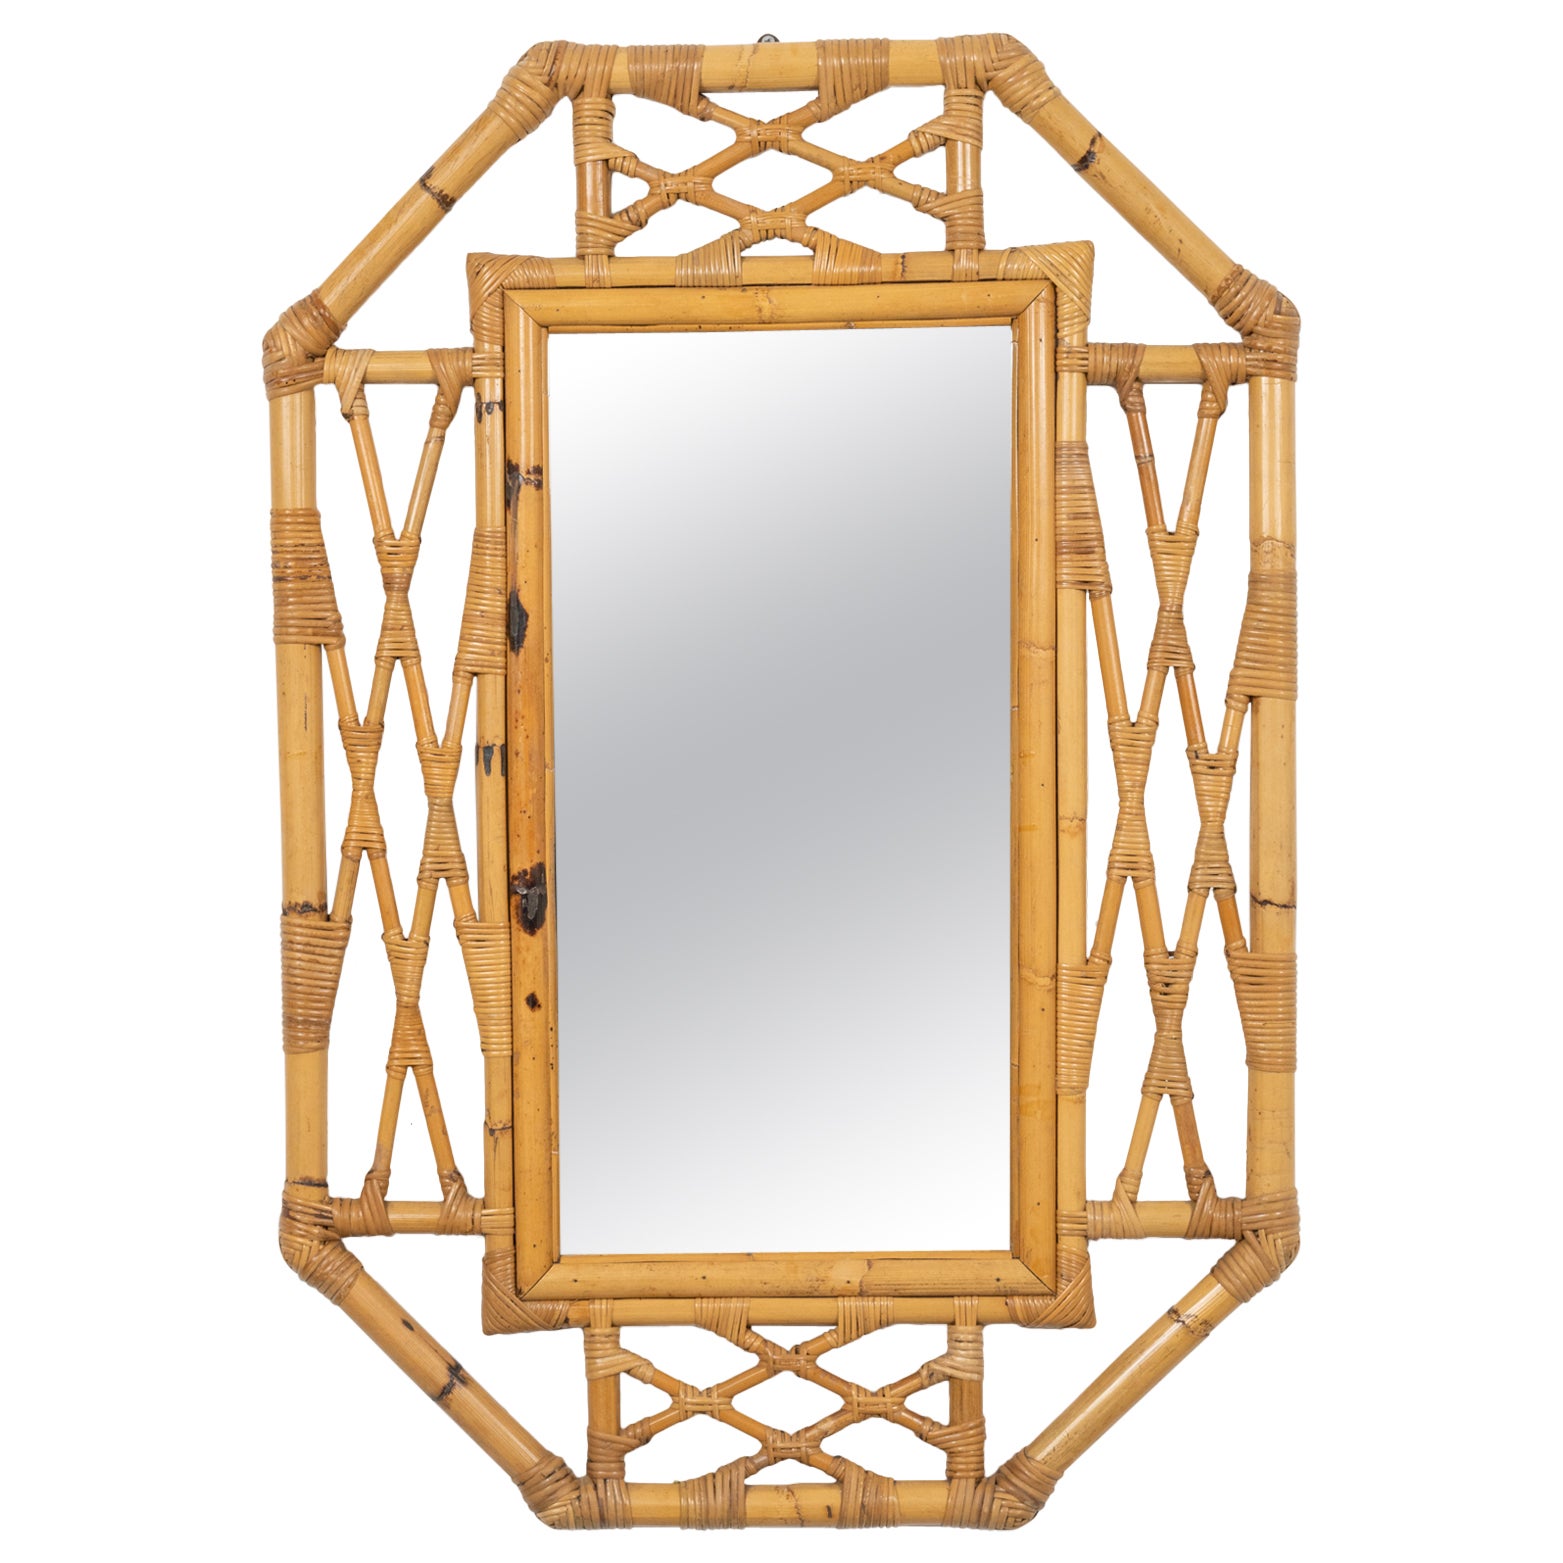 Midcentury Bamboo and Rattan Wall Mirror Vivai Del Sud Style, Italy 1970s For Sale